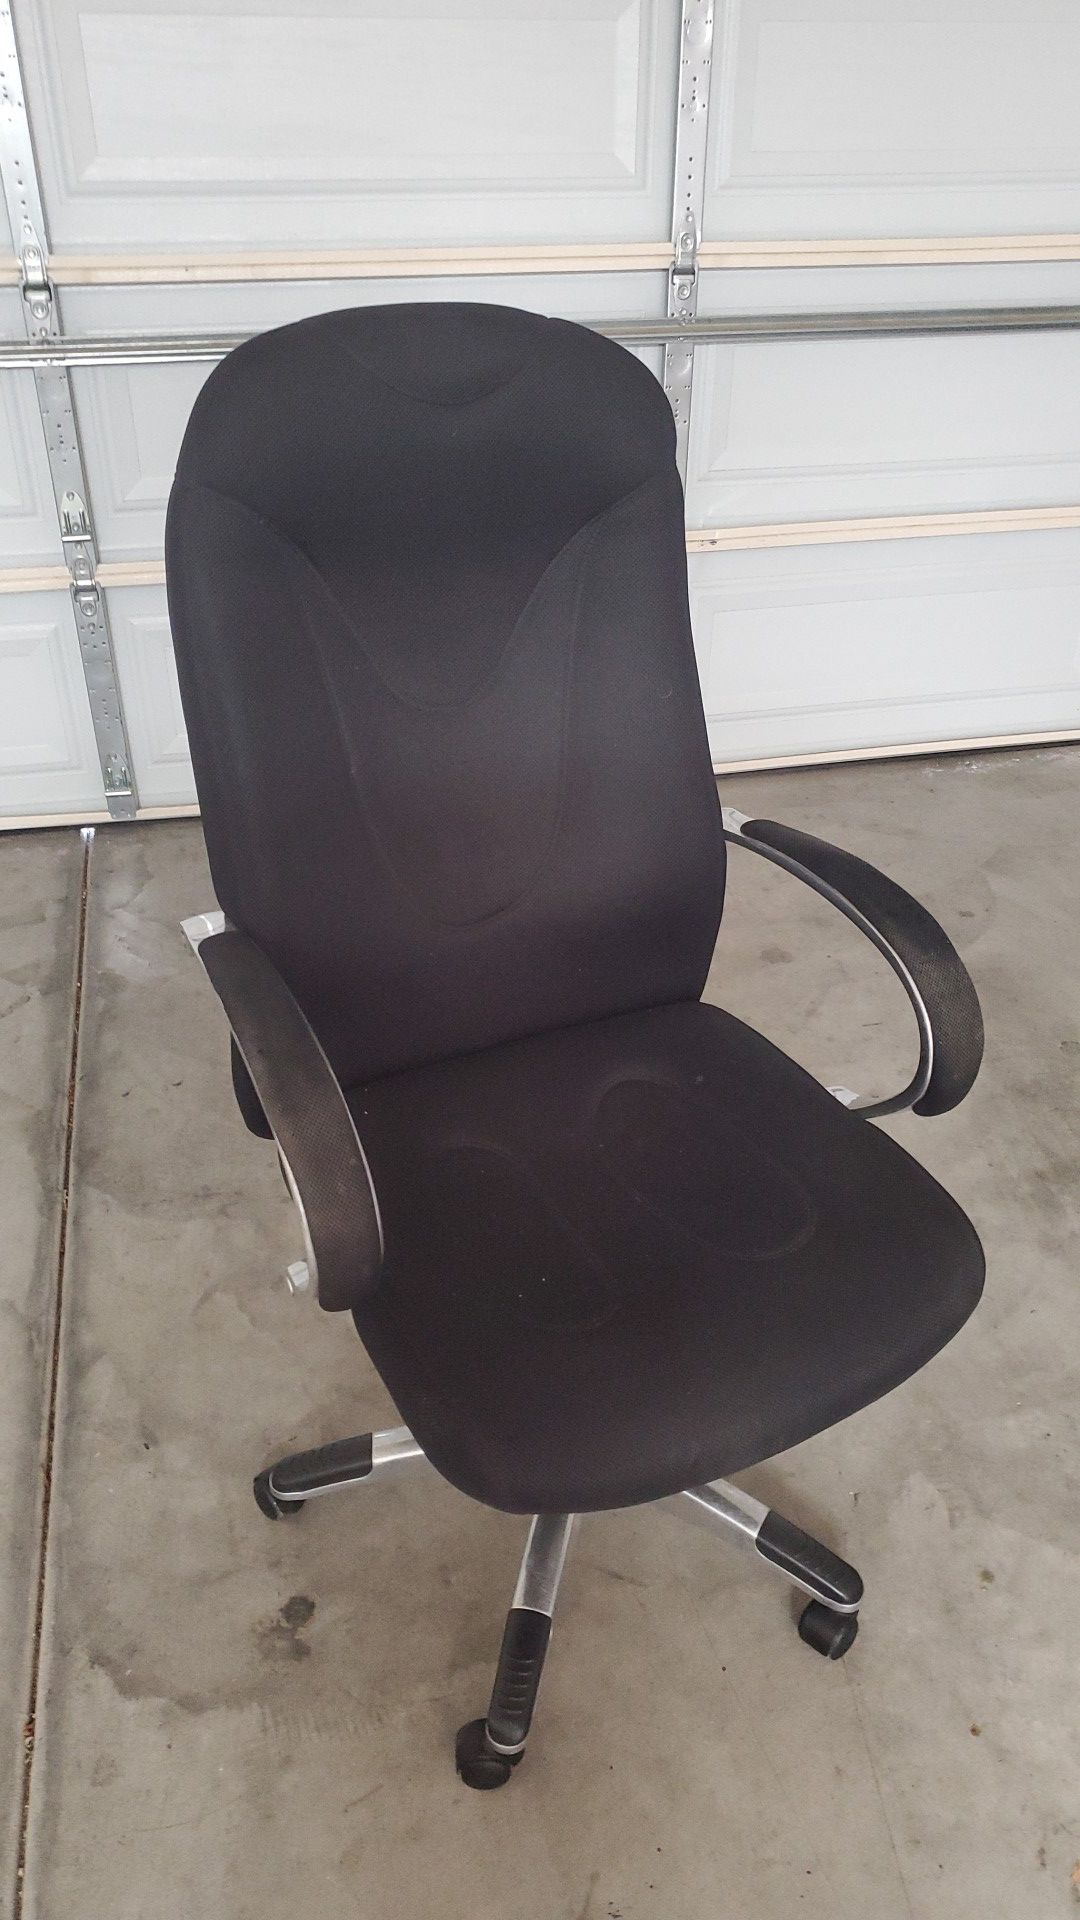 Free office chair